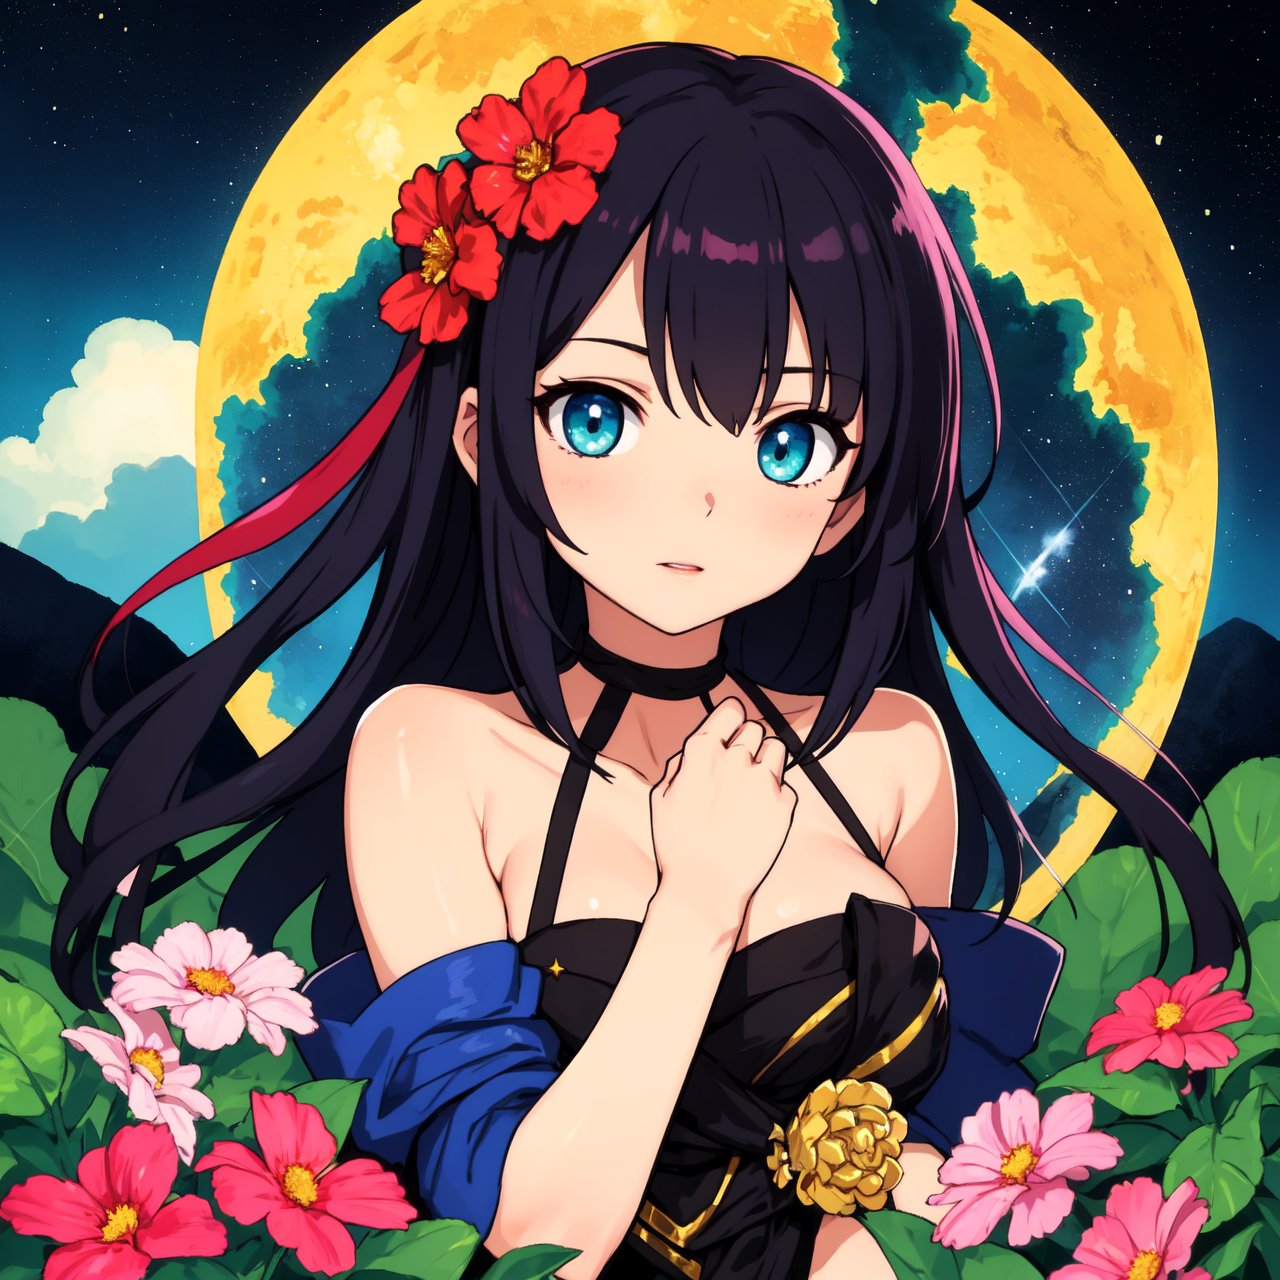 top quality, high_resolution, distinct_image, detailed background, girl, flower, garden, starry sky,